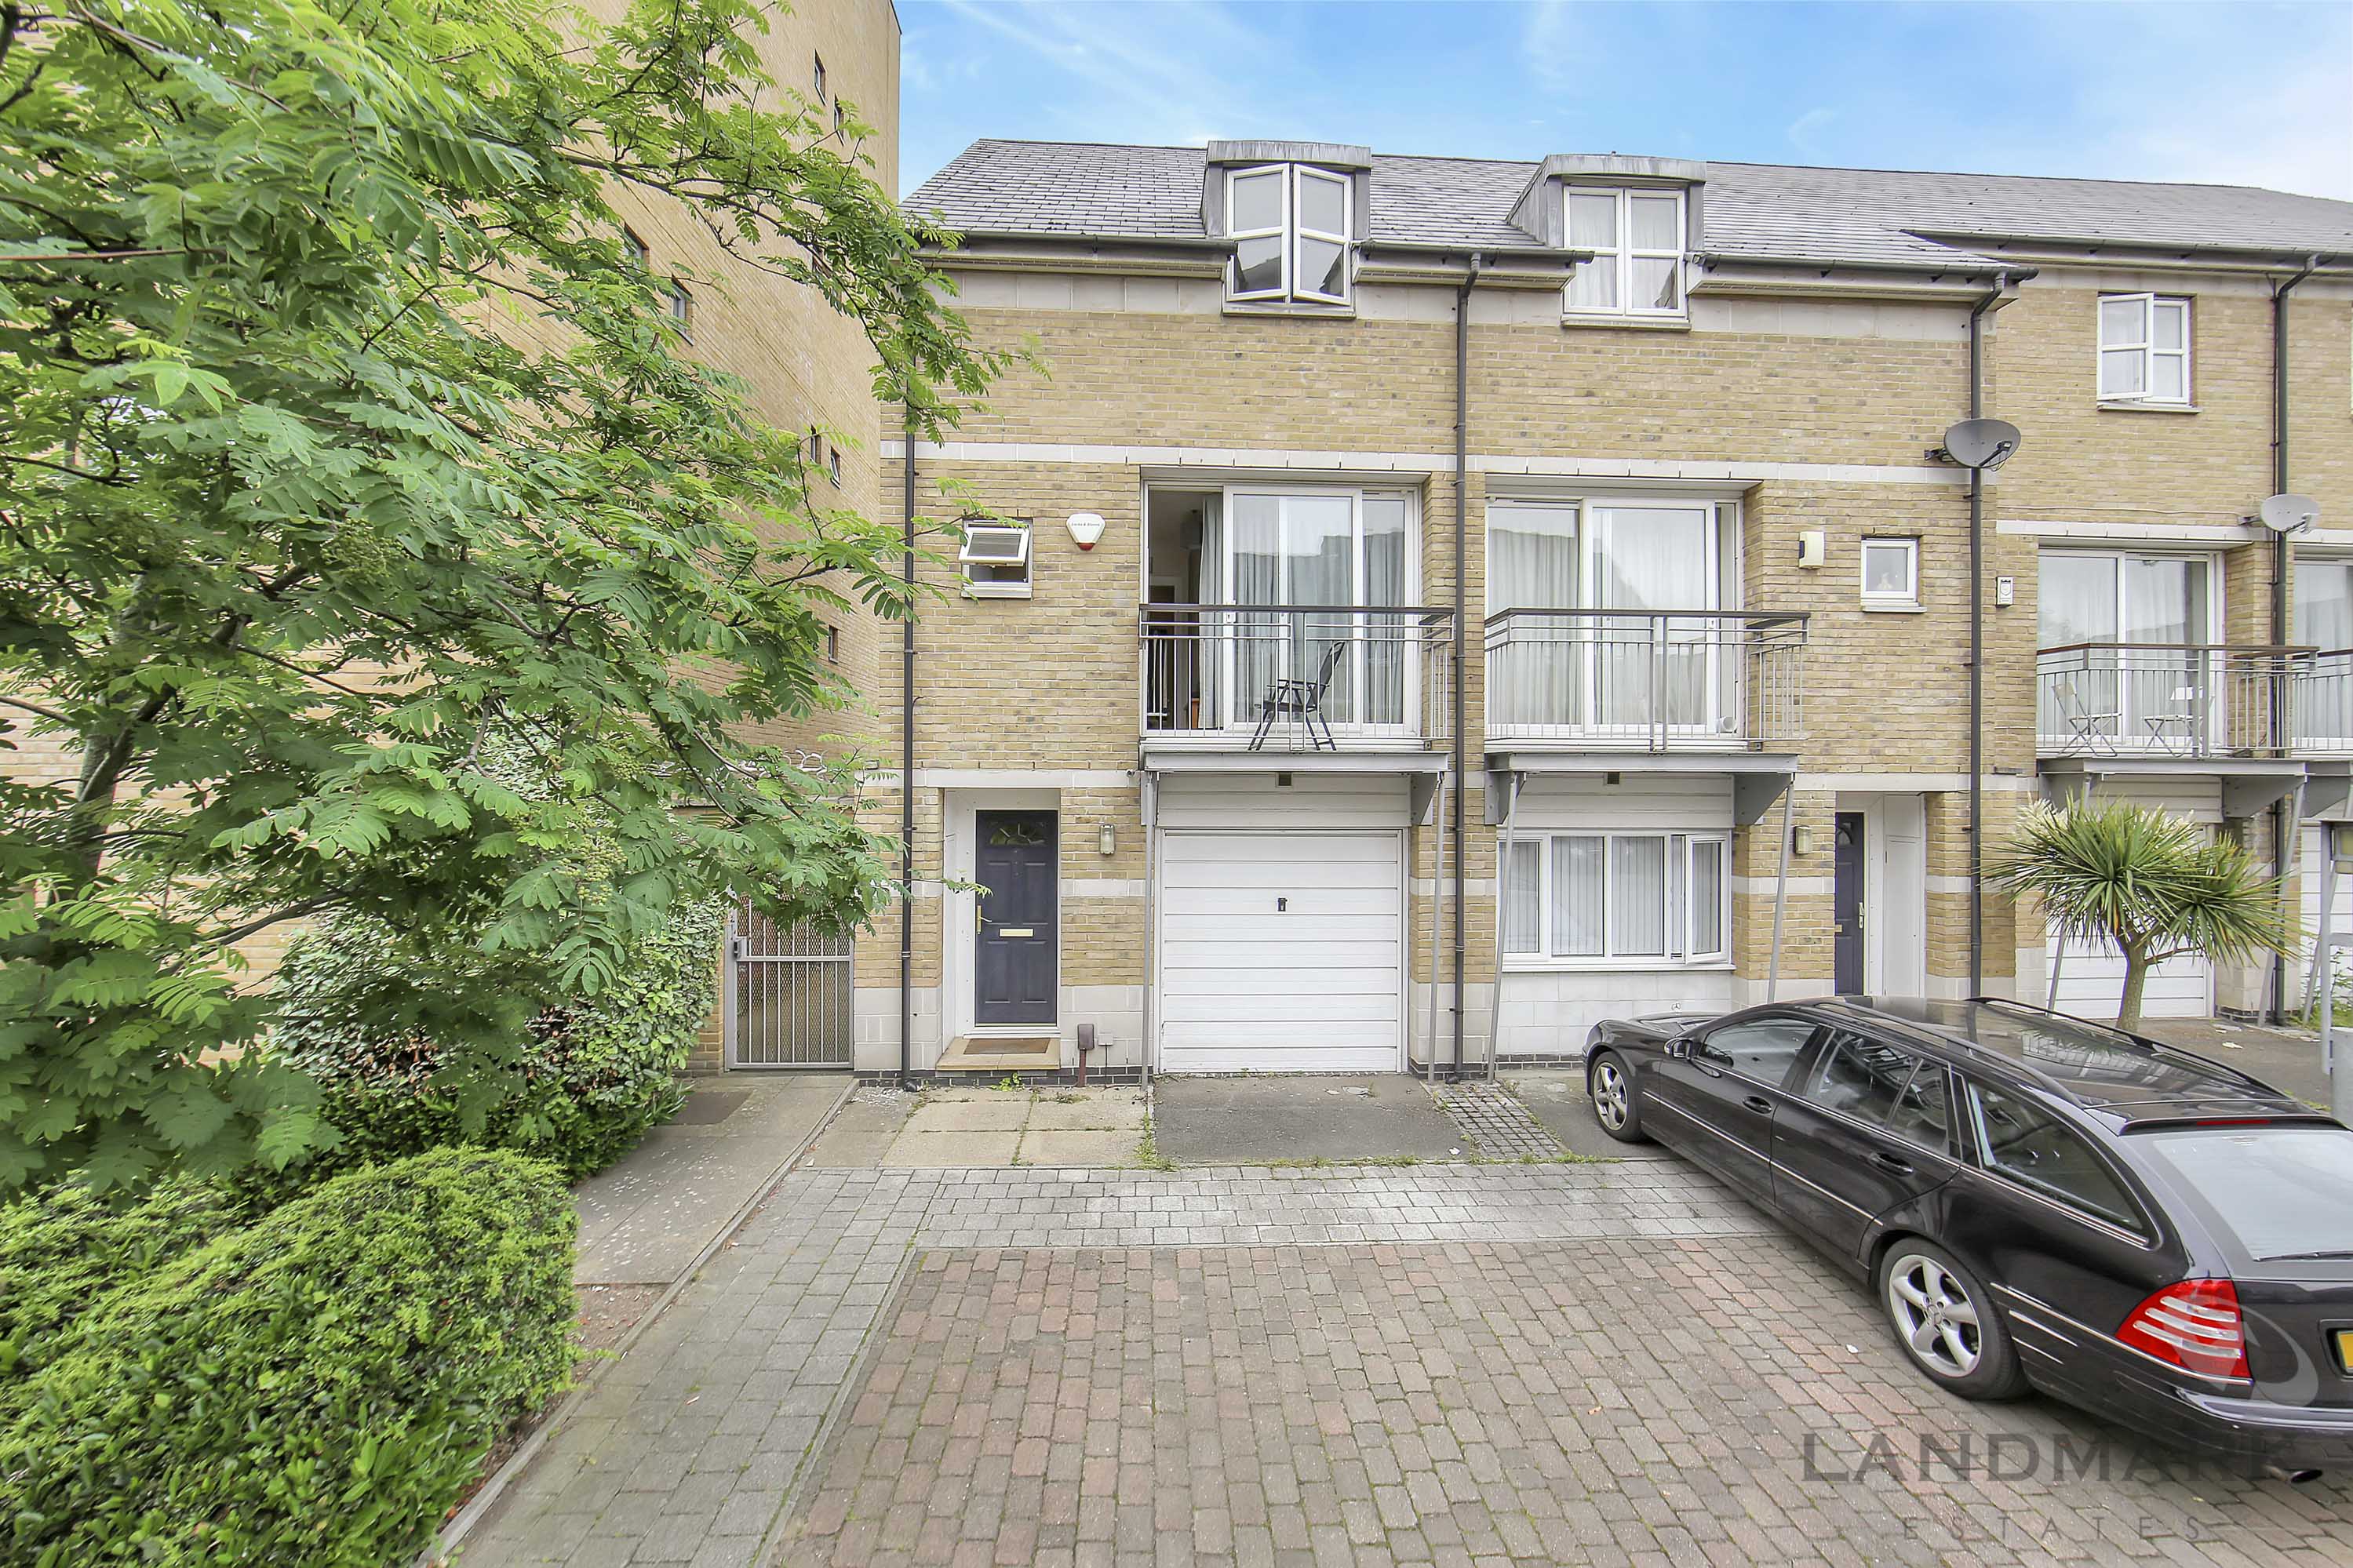 4 bed house to rent in Bering Square, London, E14 